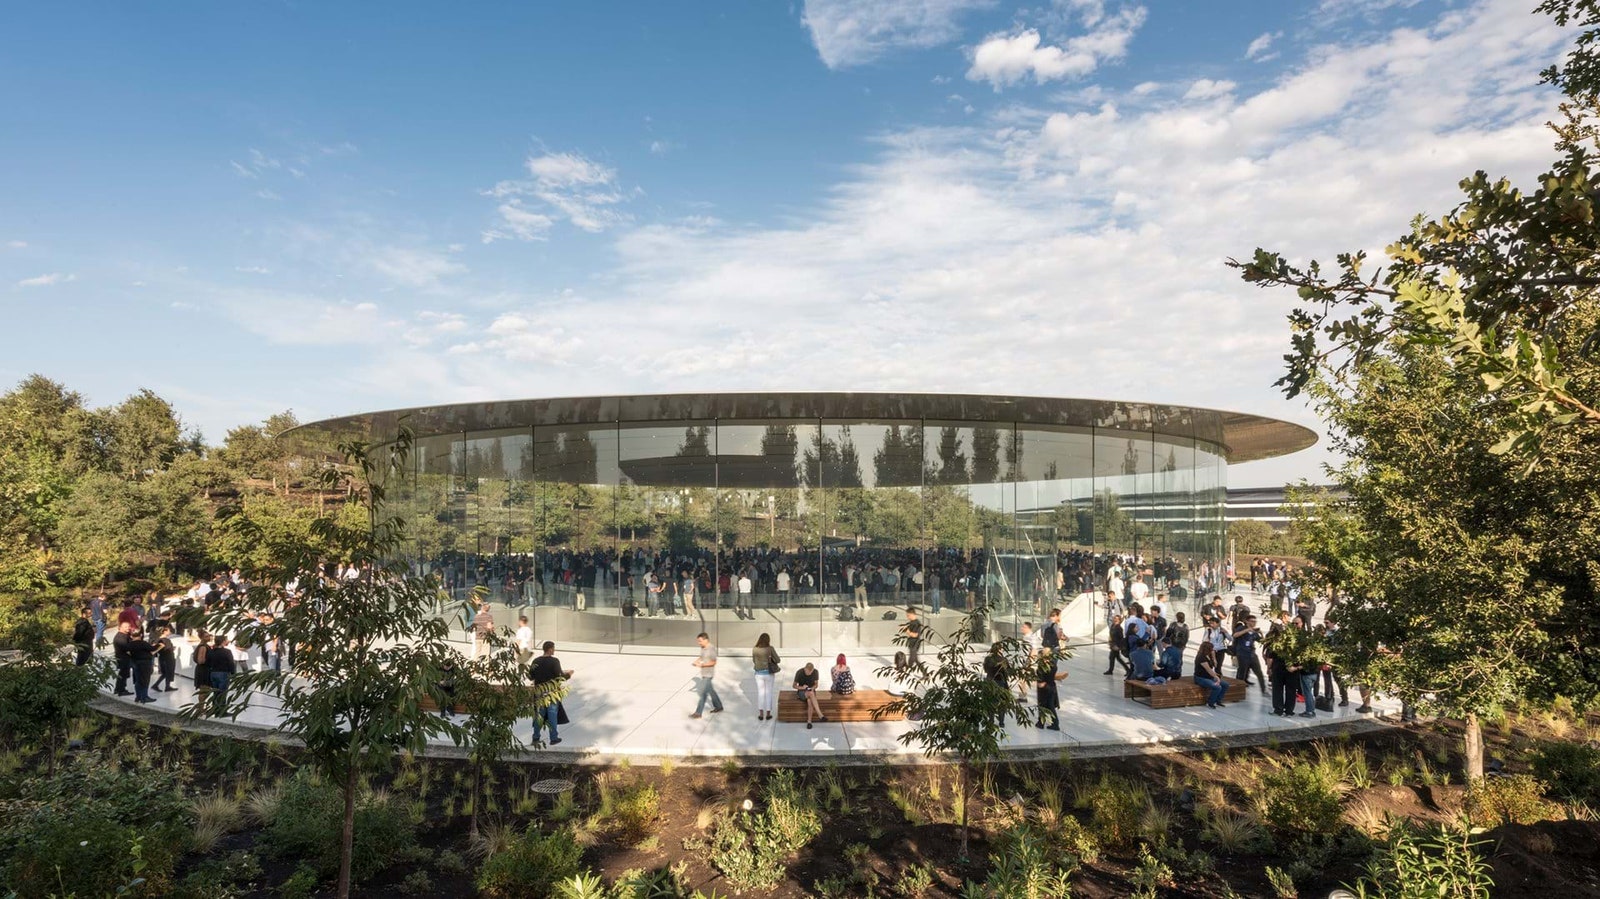 Steve Jobs theater by FosterPartners.